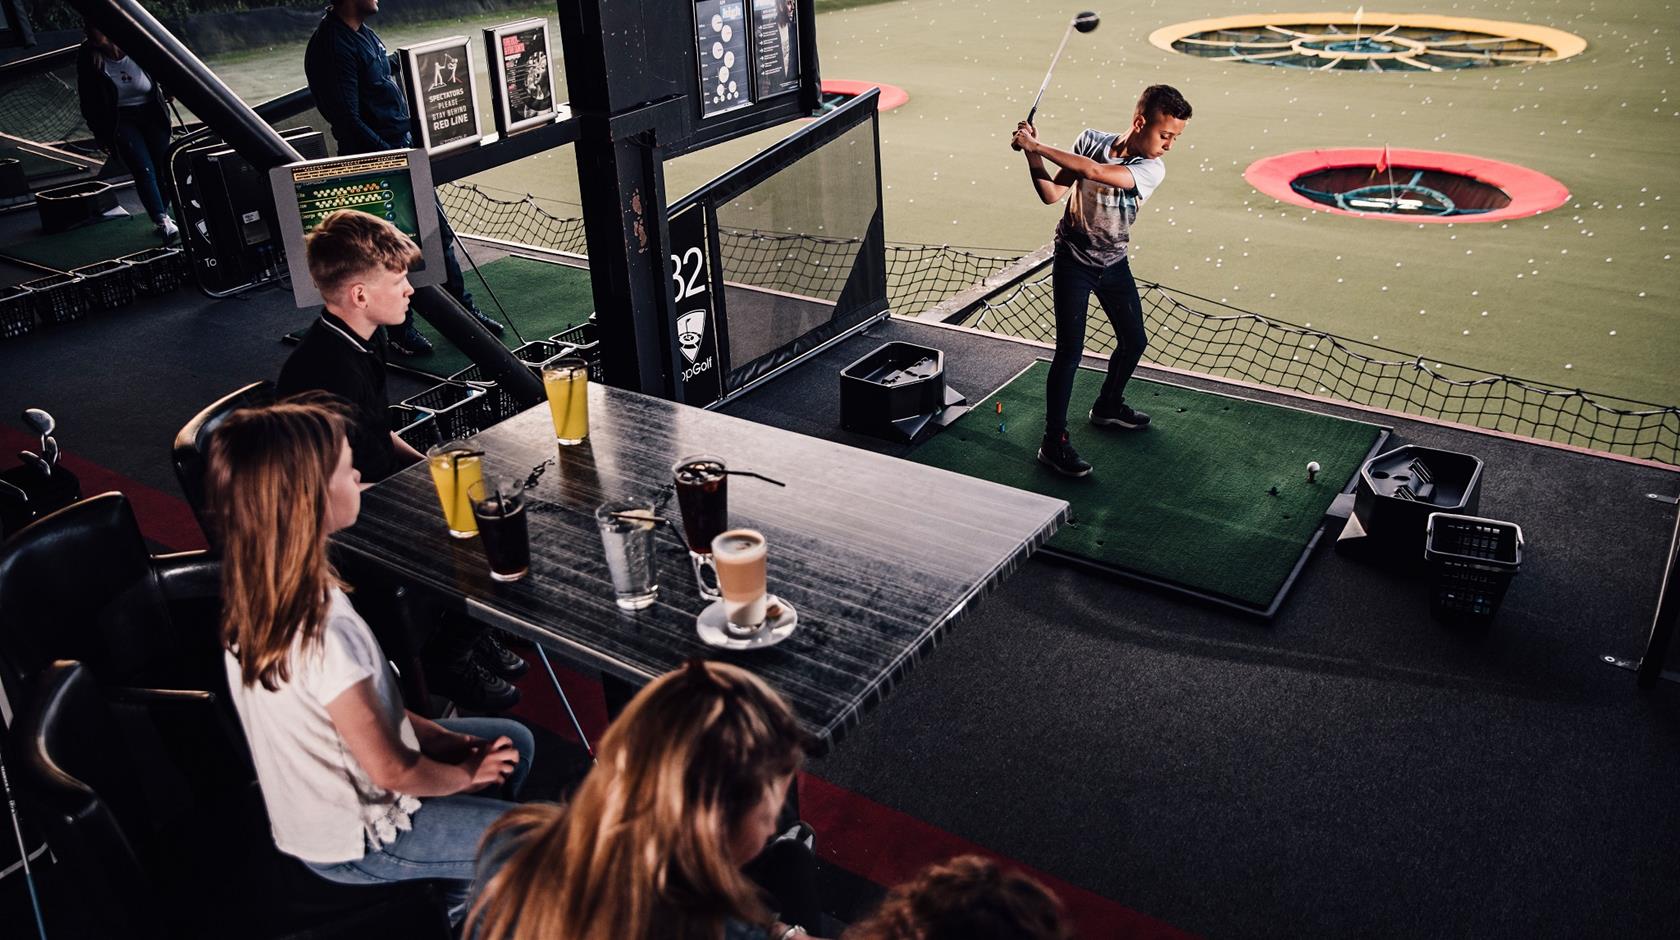 Best places to play some golf with your mates or loved ones after work